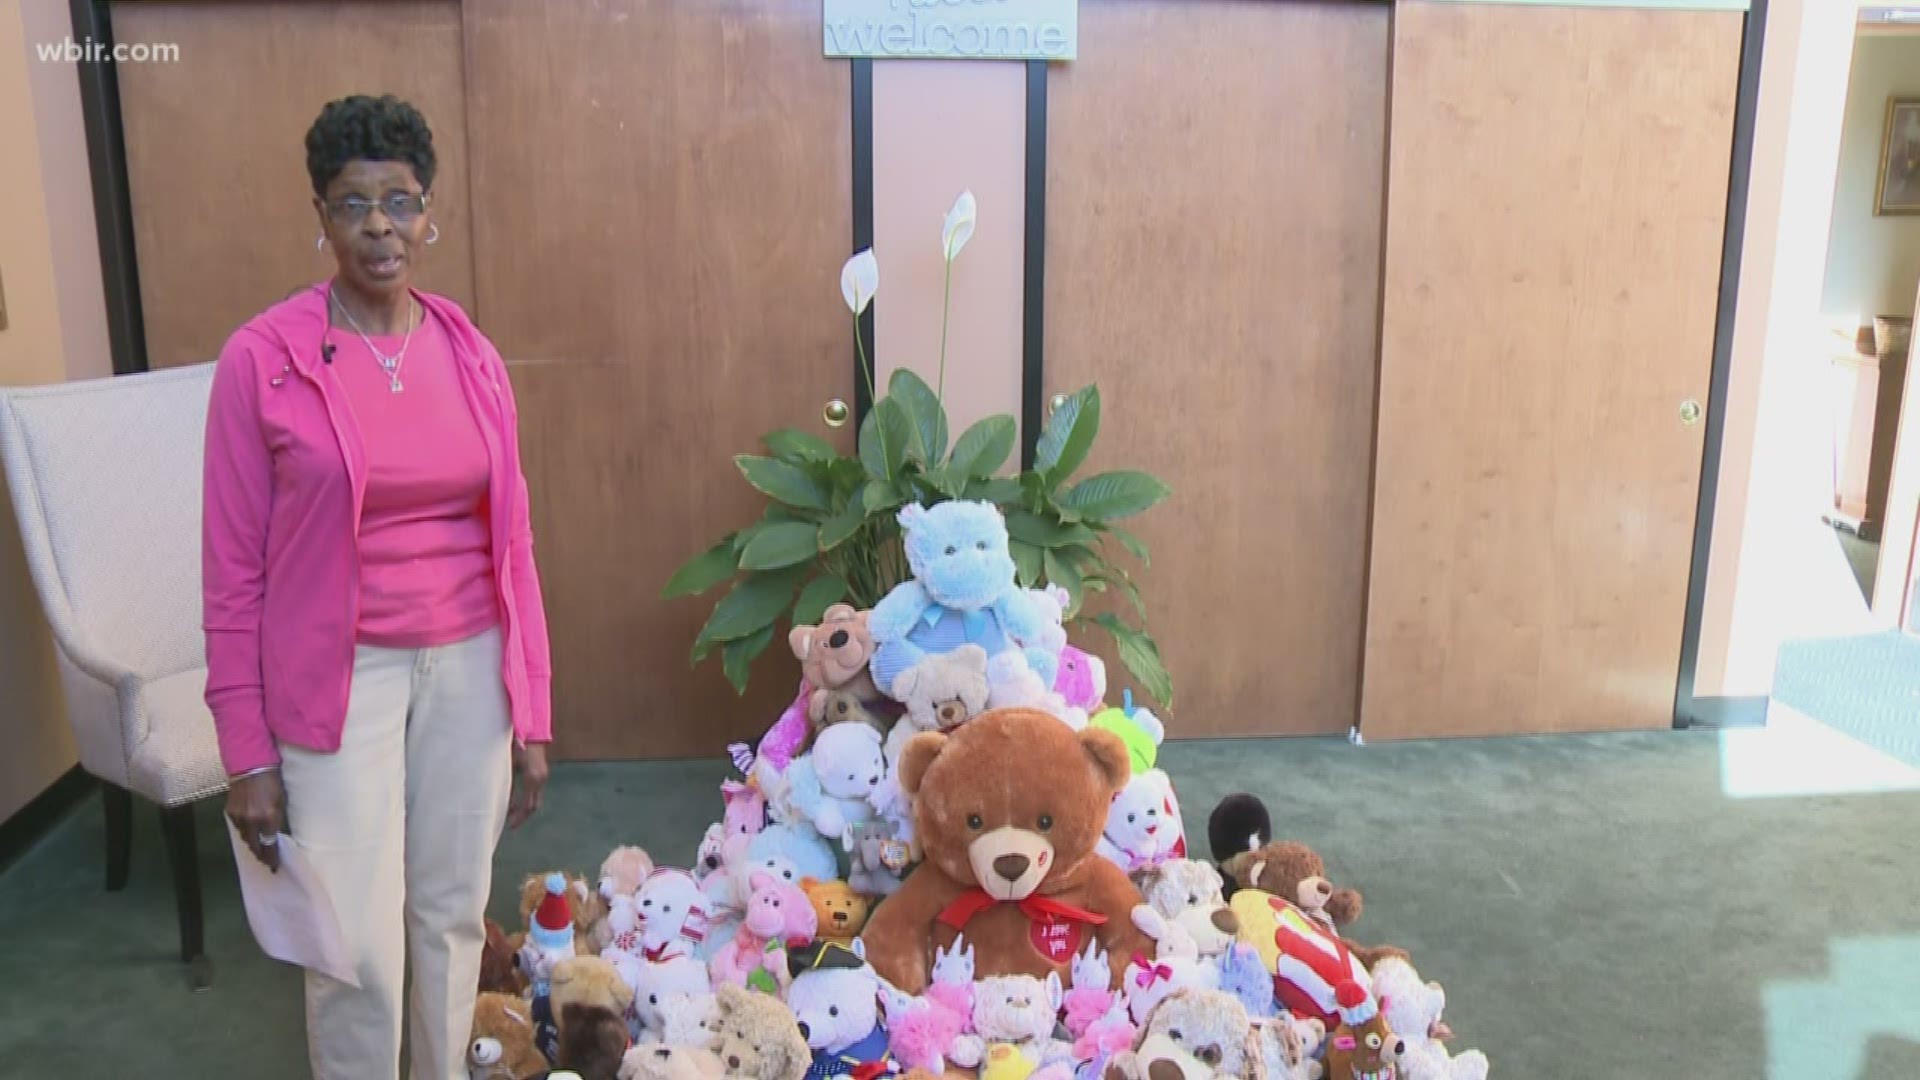 Knox County Juvenile Court has dozens of new stuffed animals for children who come through the court thanks to a Knoxville woman.